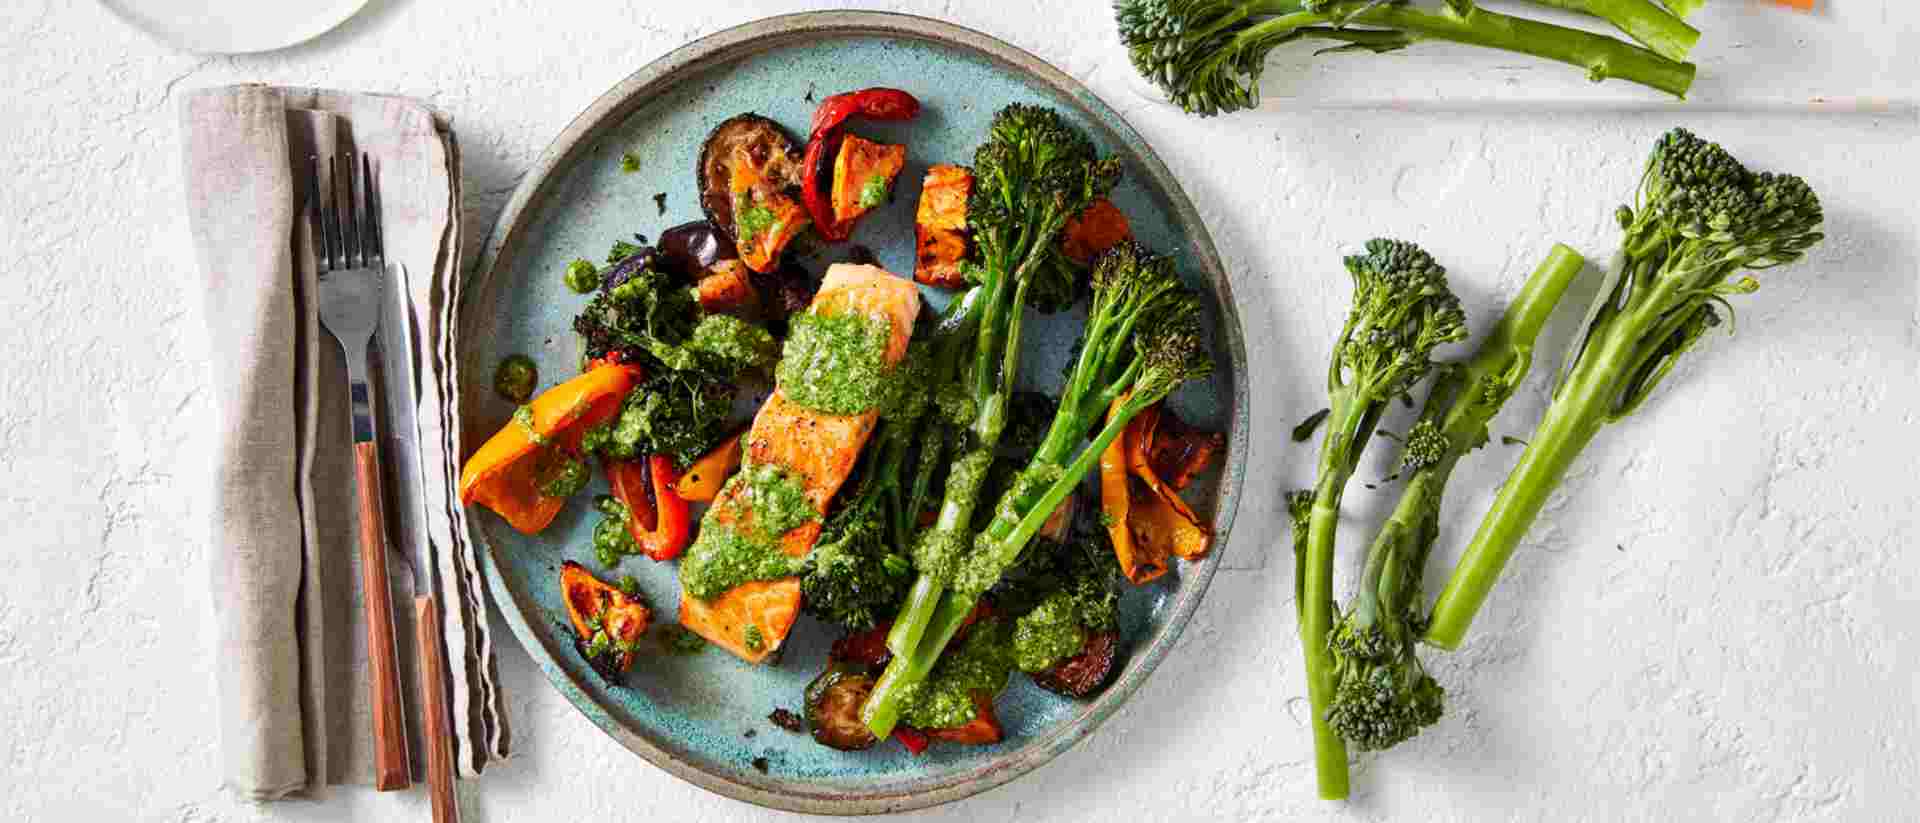 Oven Baked Broccolini And Crispy Salmon